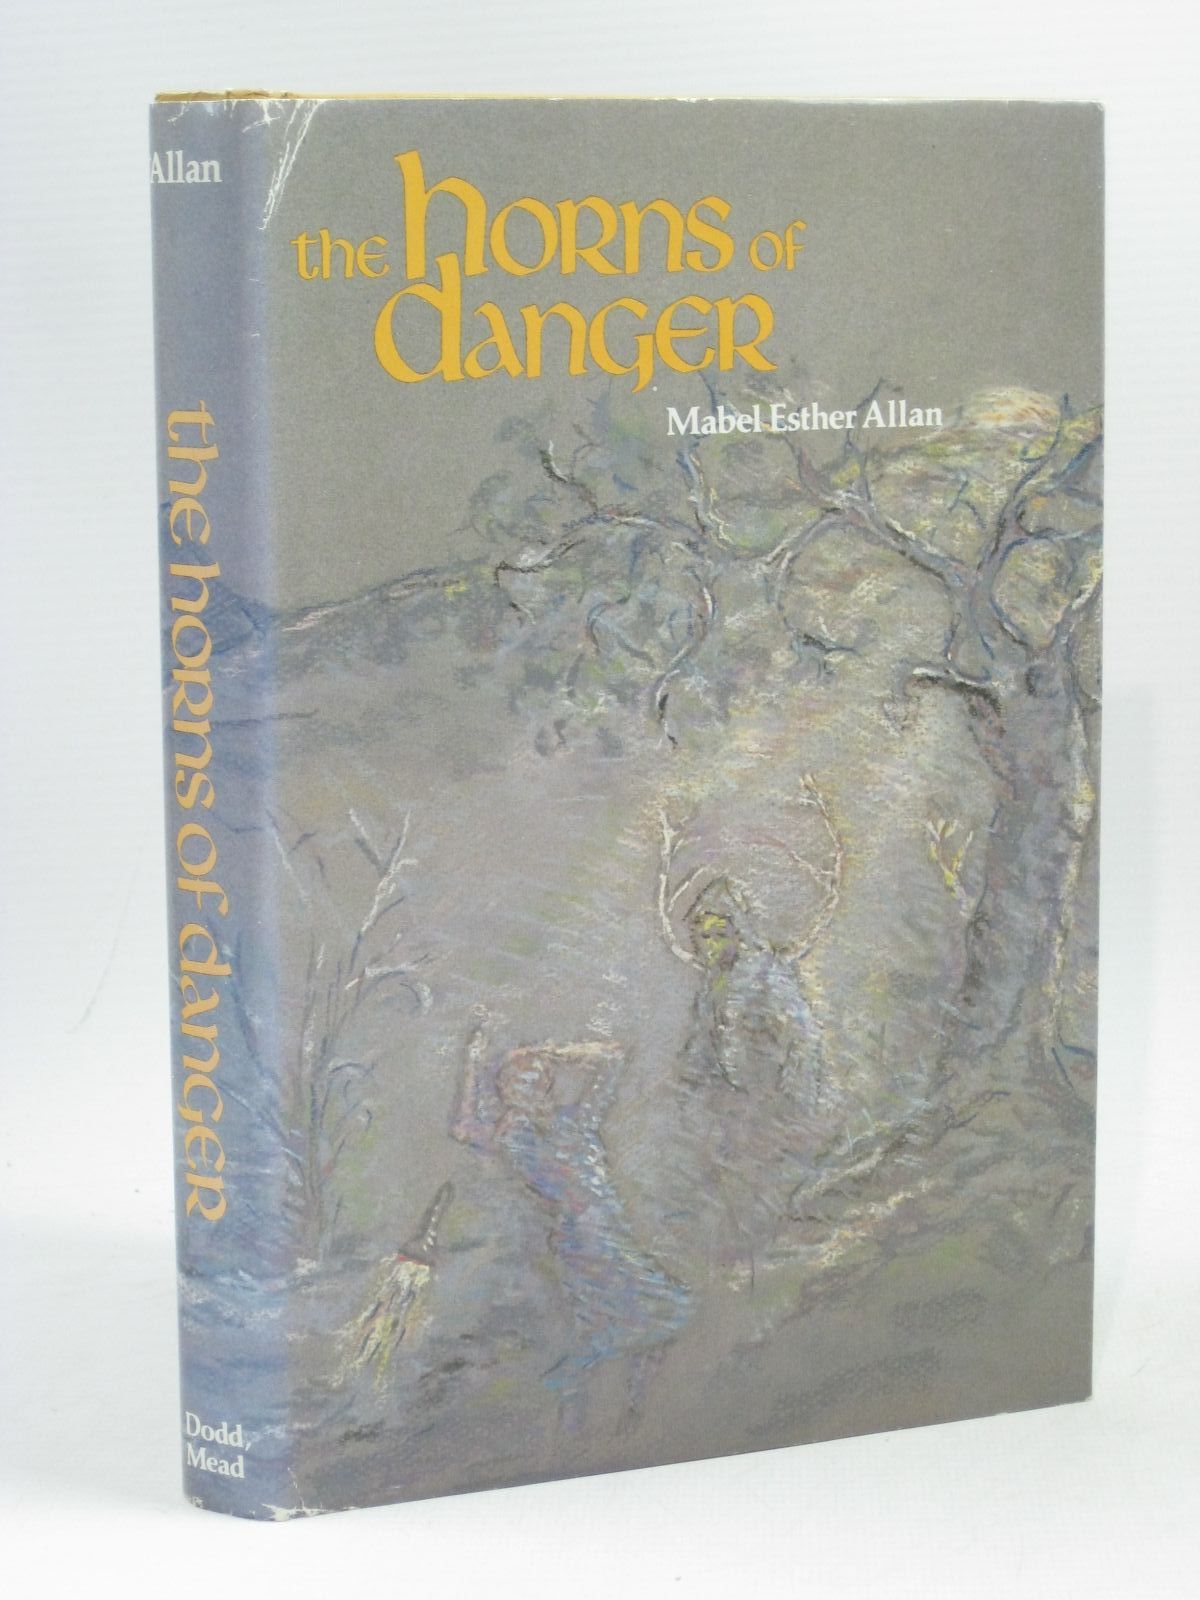 Cover of THE HORNS OF DANGER by Mabel Esther Allan